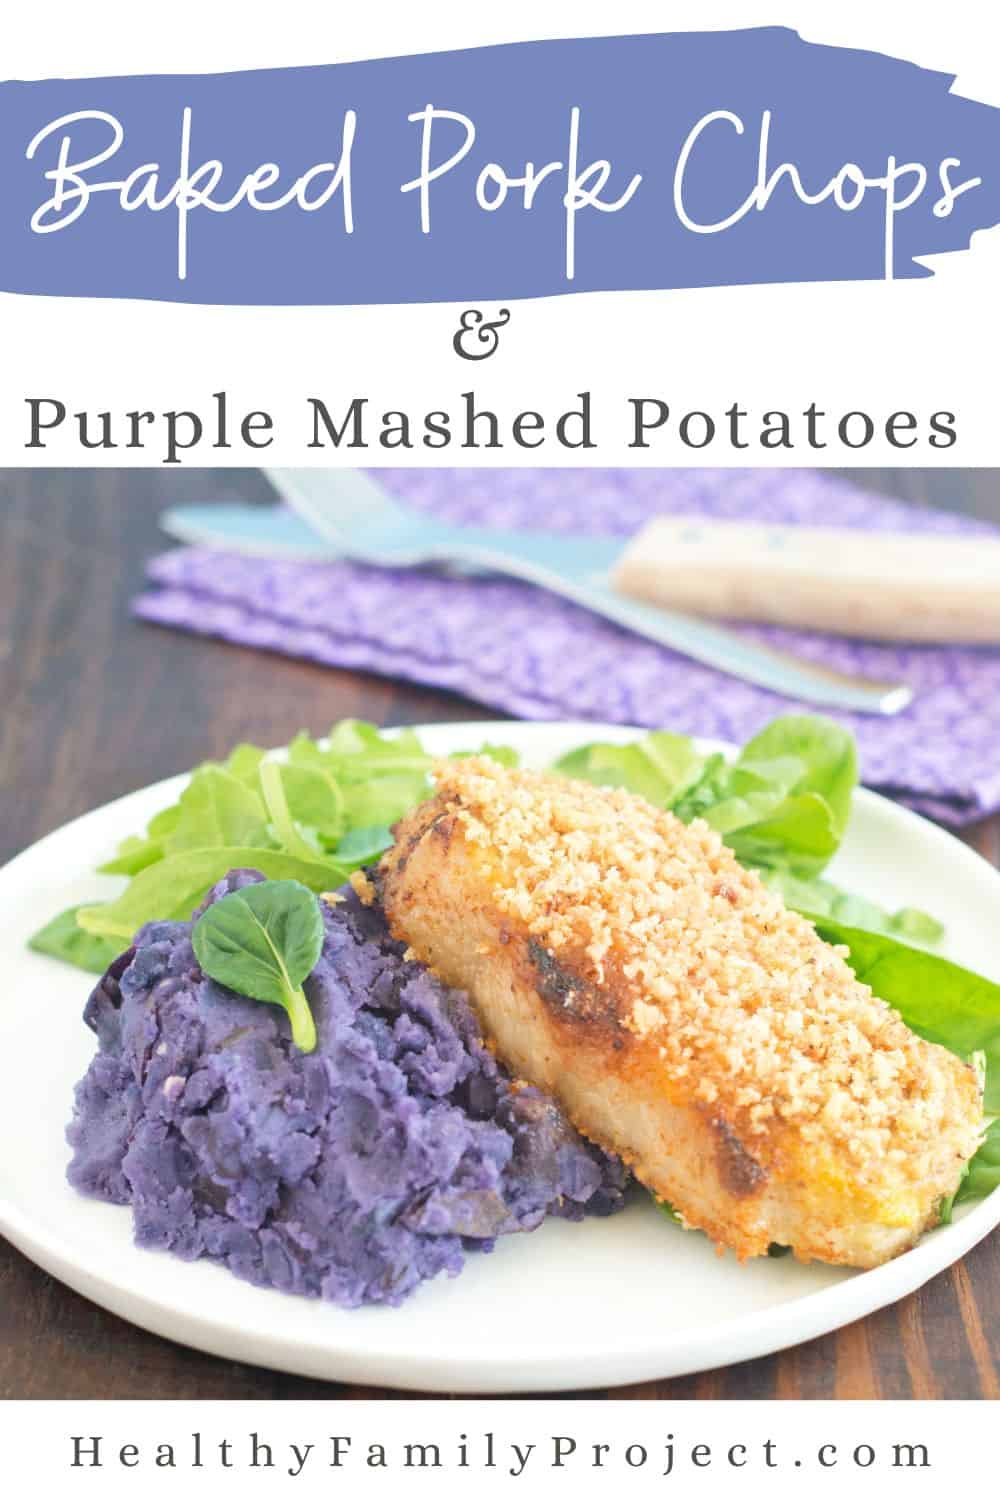 baked pork chops with purple mashed potatoes